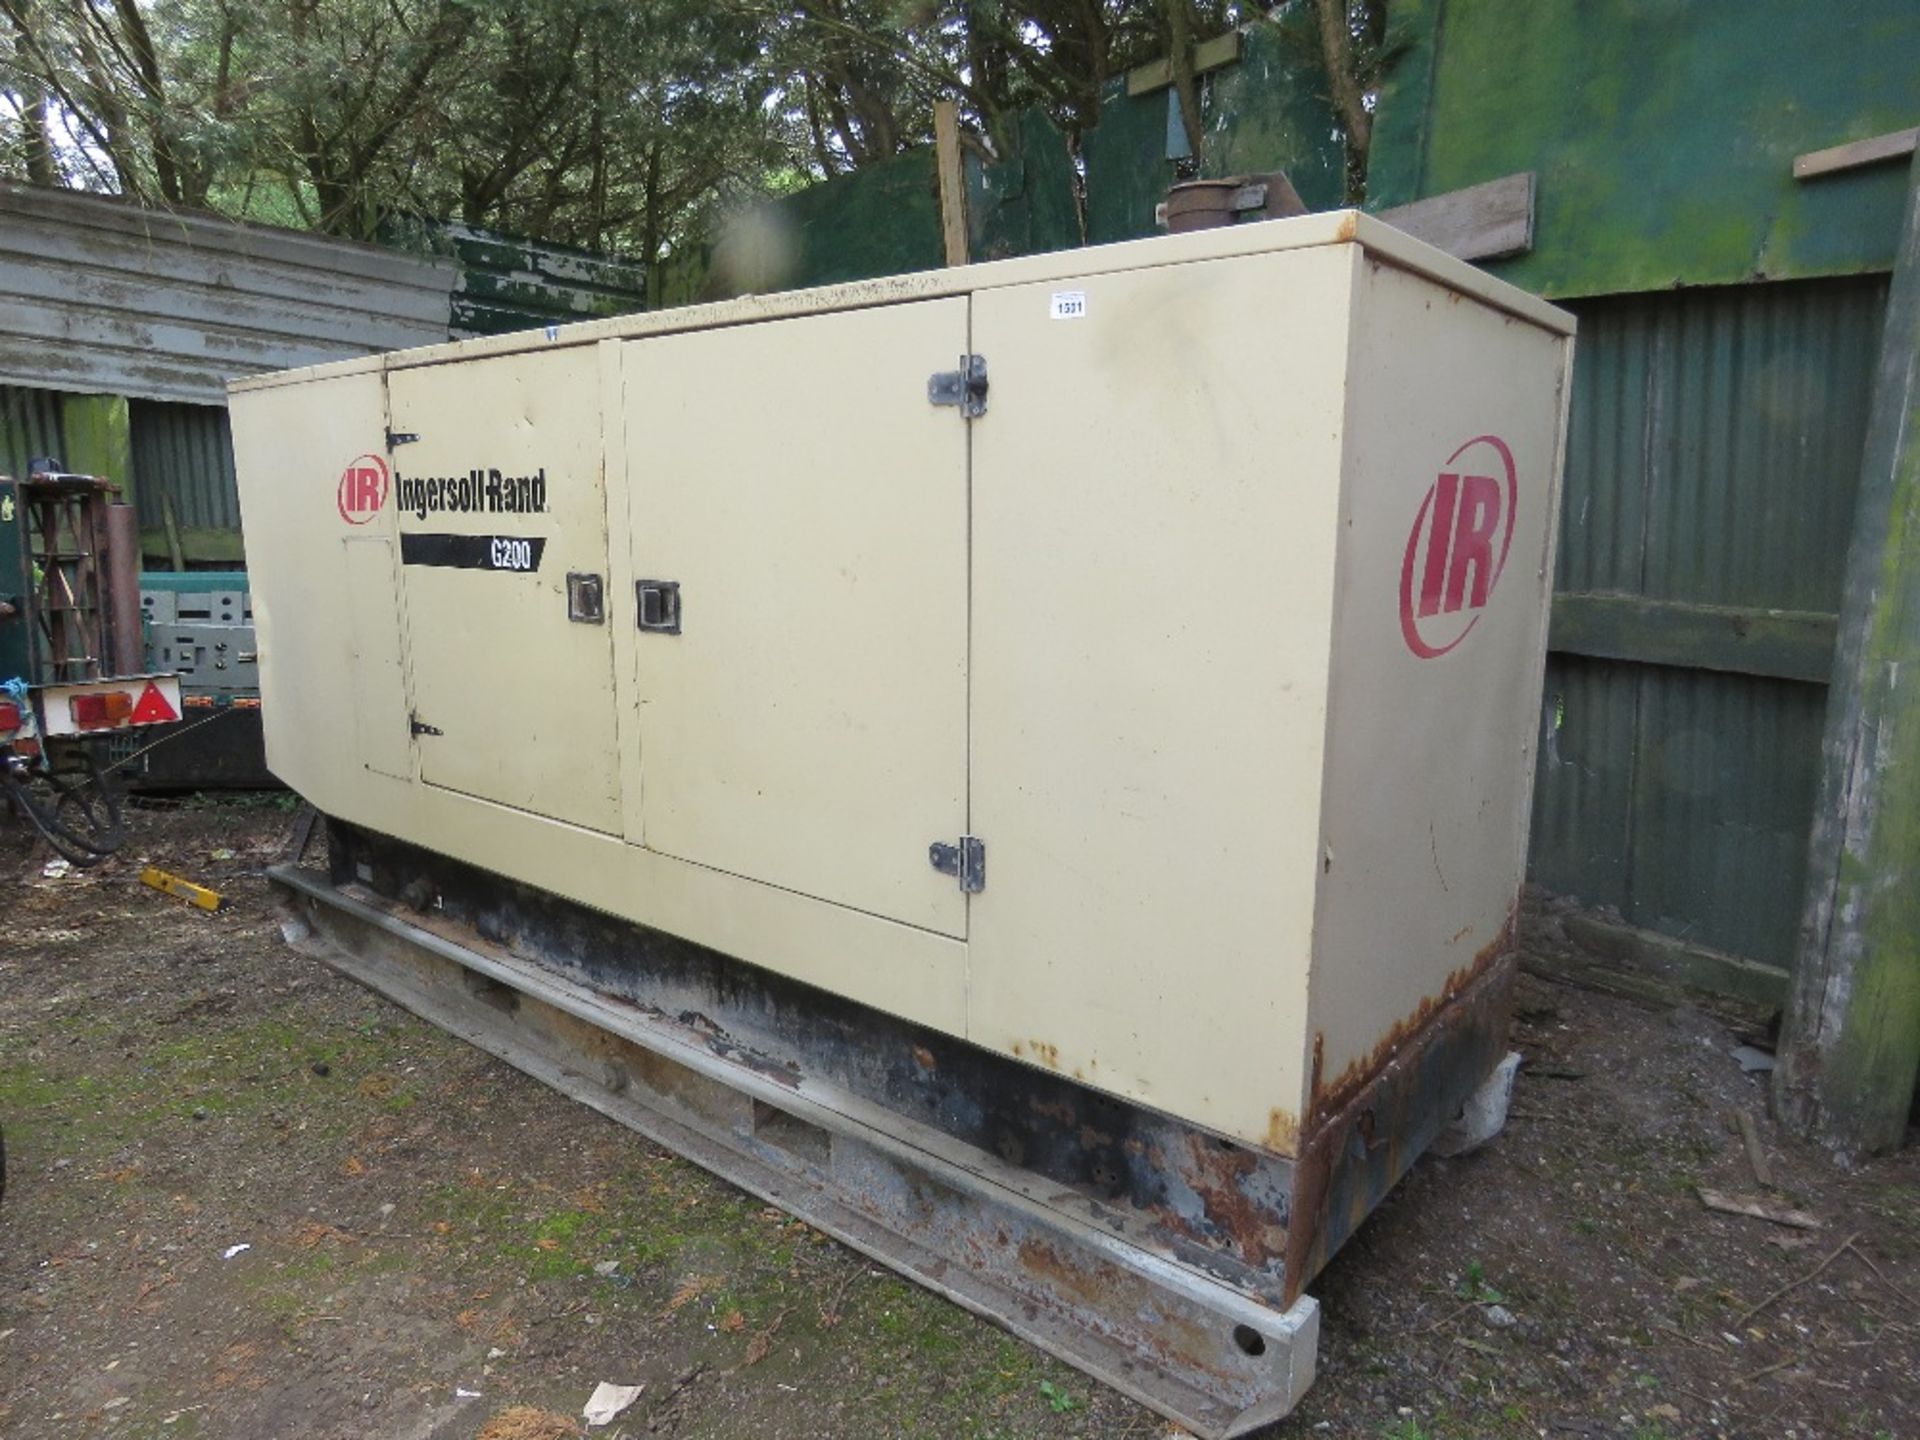 INGERSOLL RAND G200 SKID MOUNTED 200KVA RATED GENERATOR SET WITH JOHN DEERE ENGINE. WHEN TESTED WAS